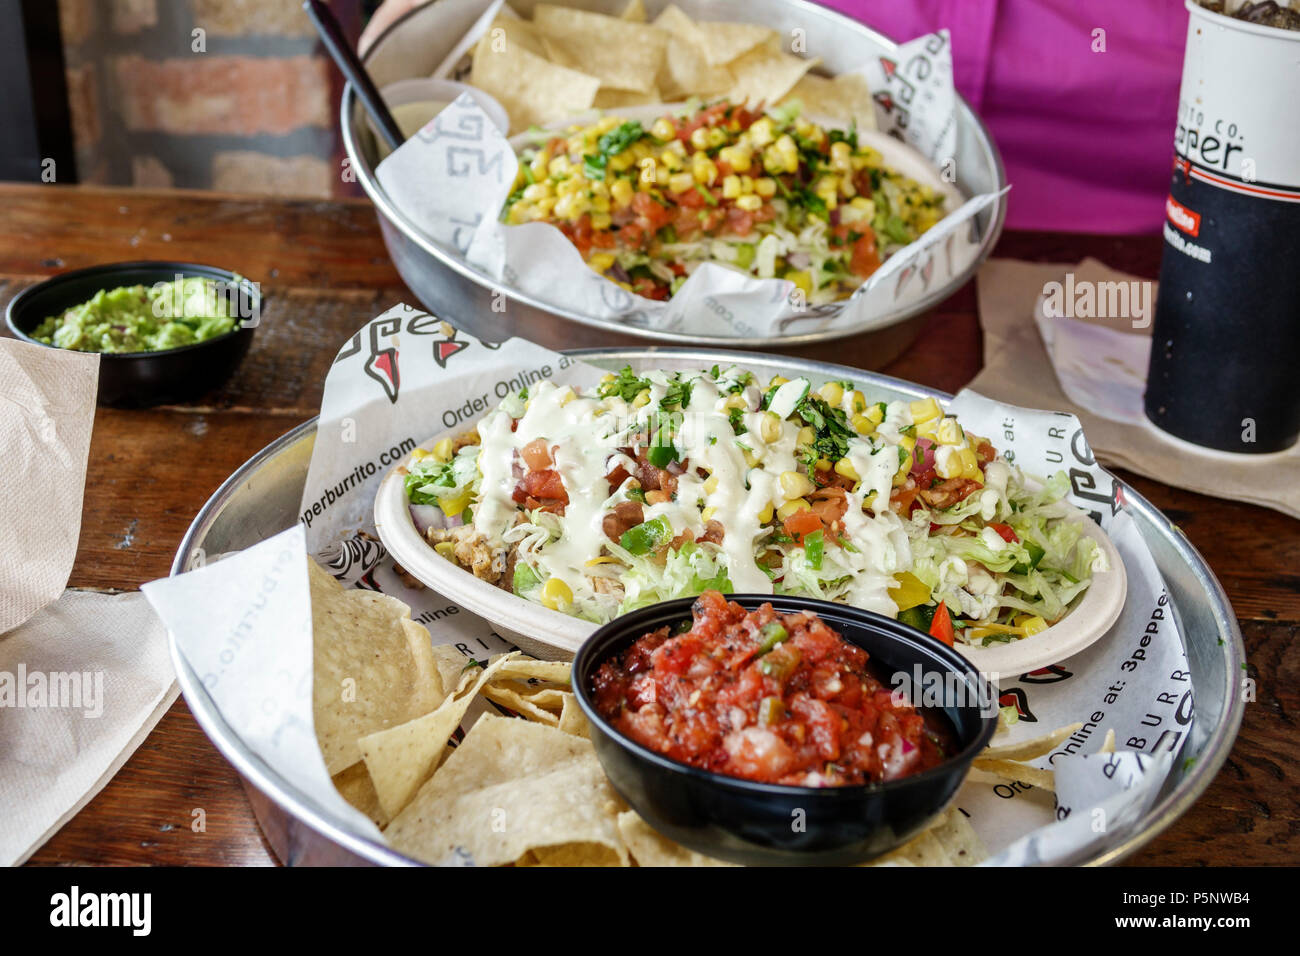 Fort Ft. Myers Florida,1st First Street,3 Pepper Burrito Co Company,restaurant restaurants food dining cafe cafes,Mexican,lunch,plate,salad bowl,salsa Stock Photo